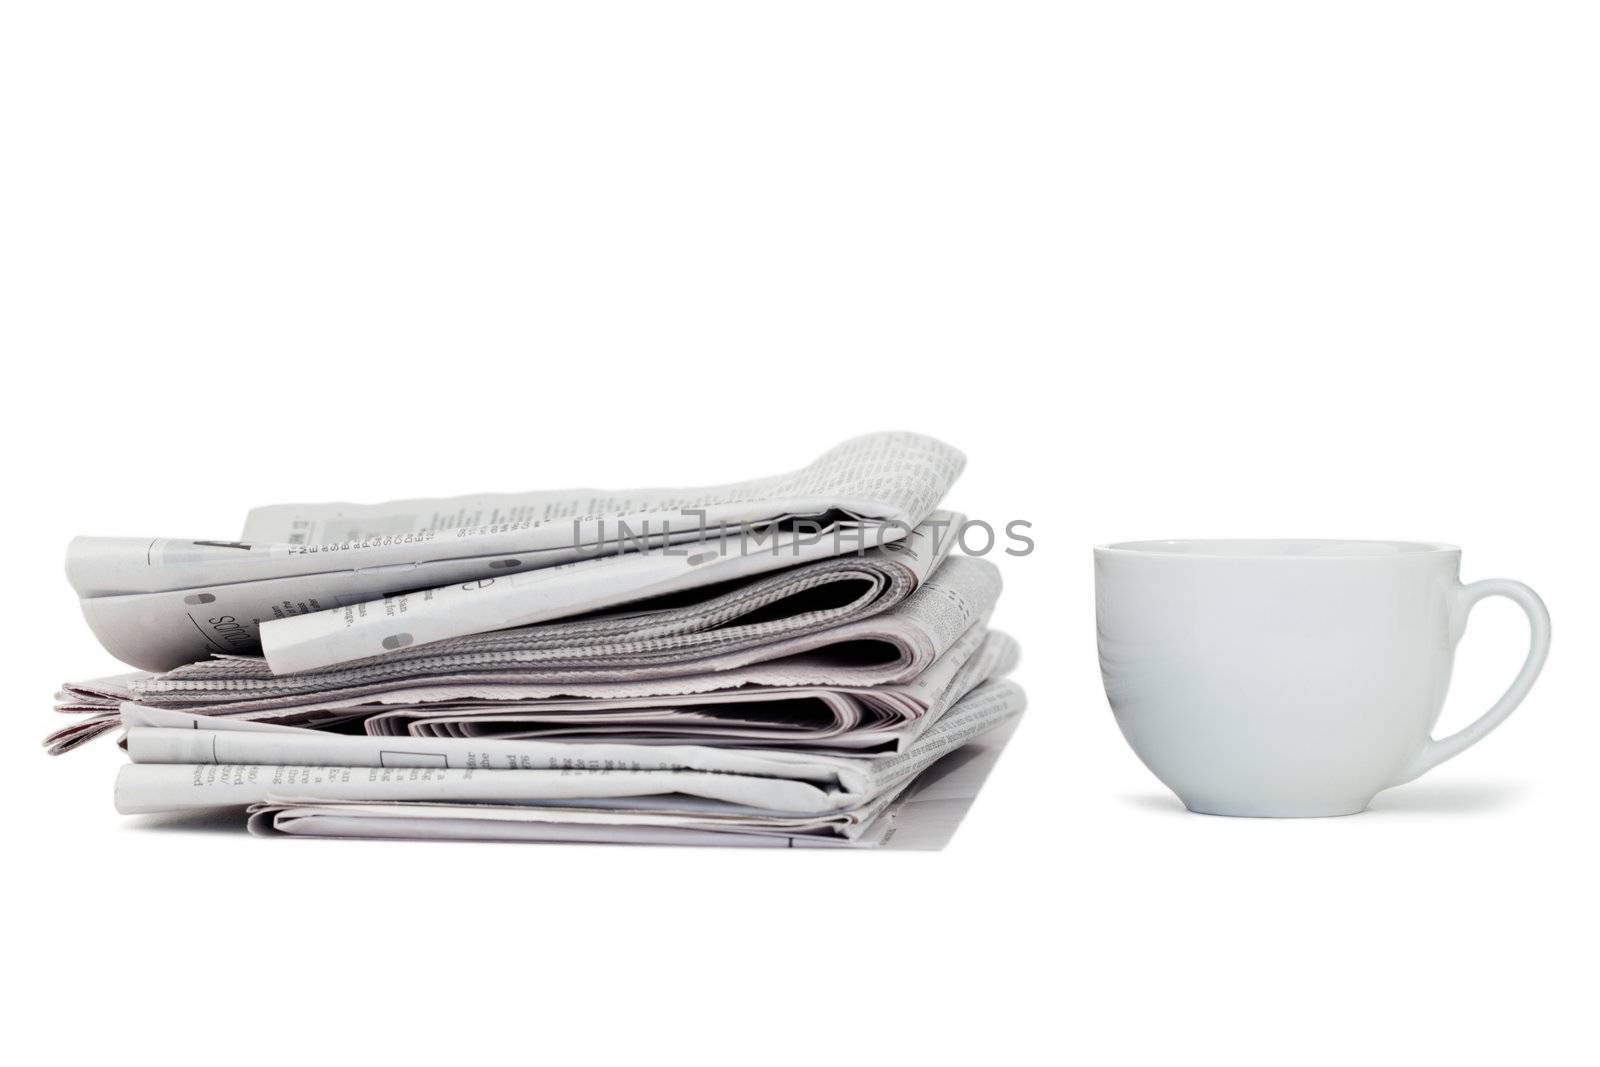 Newspapers and cup of tea on a white background